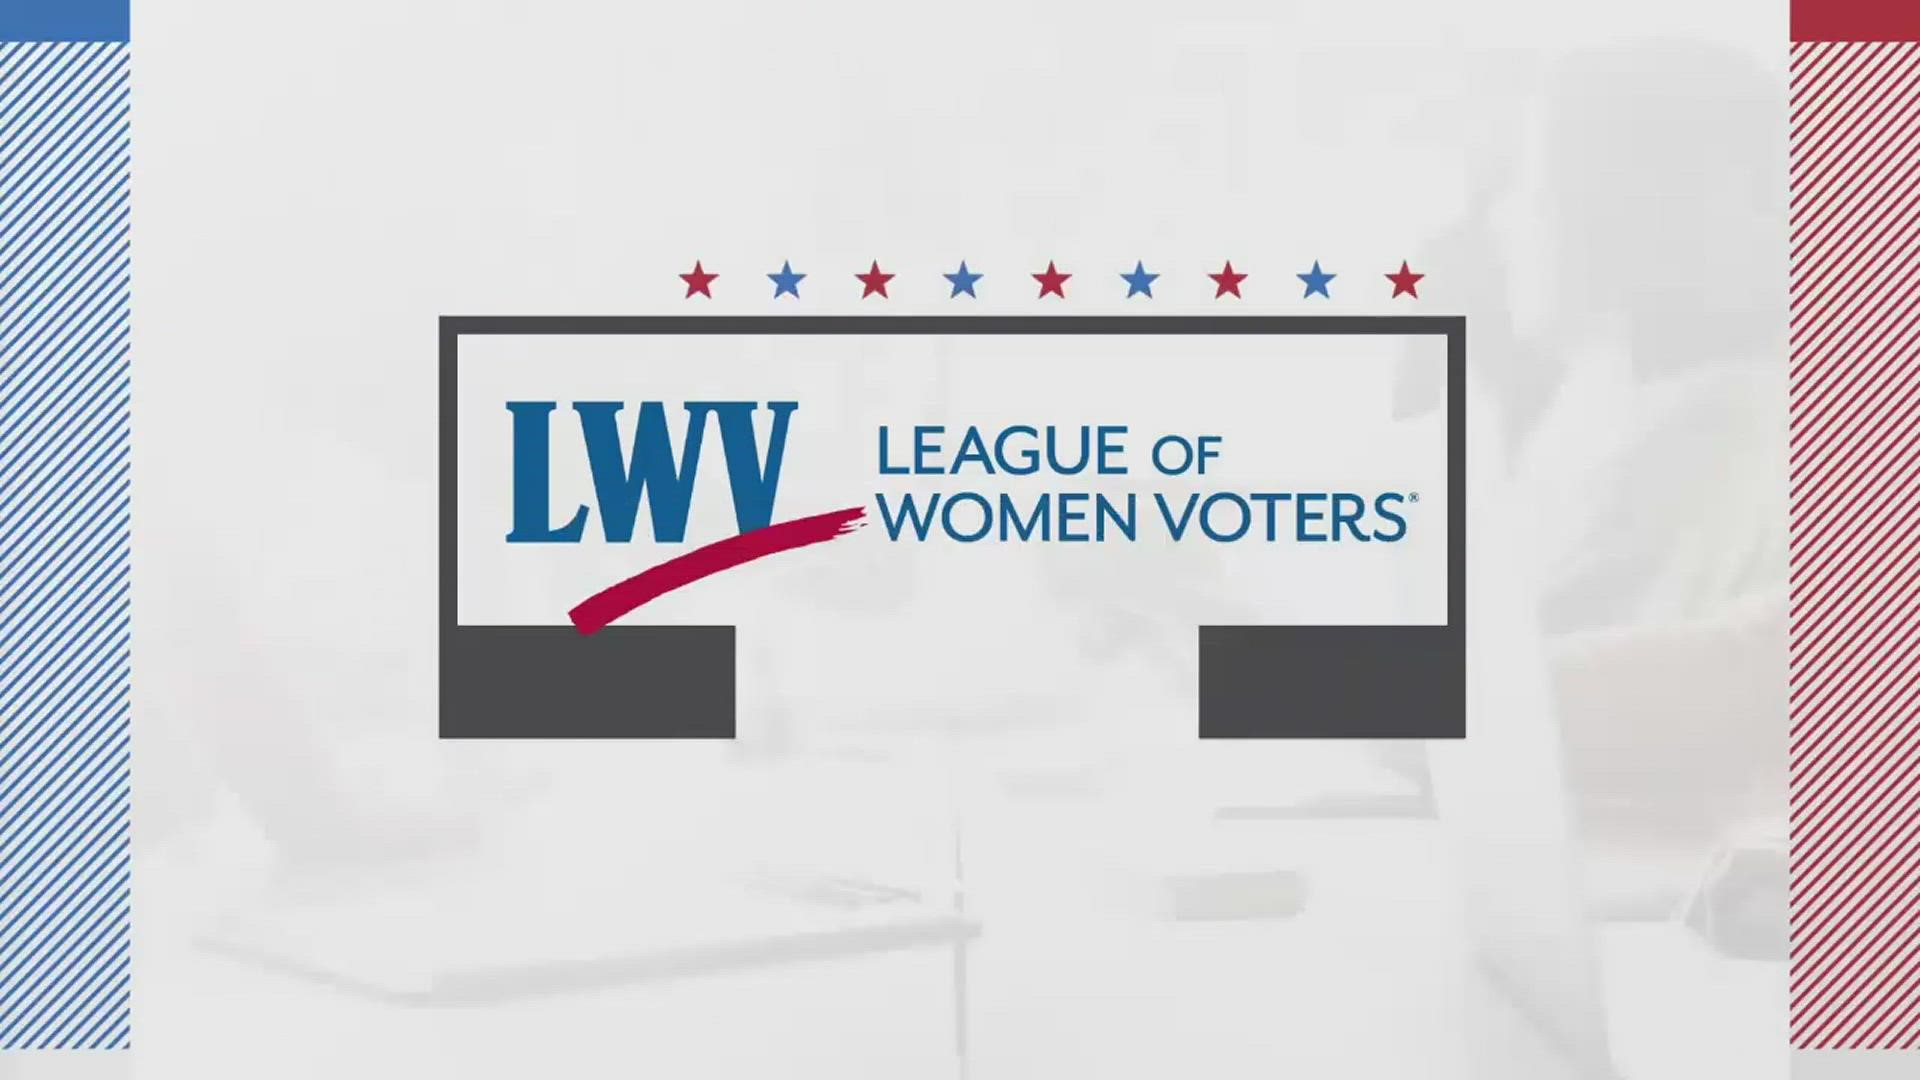 KIII-TV has partnered with the League of Women Voters-Corpus Christi to help make sure our community has the information they need before they hit the polls.